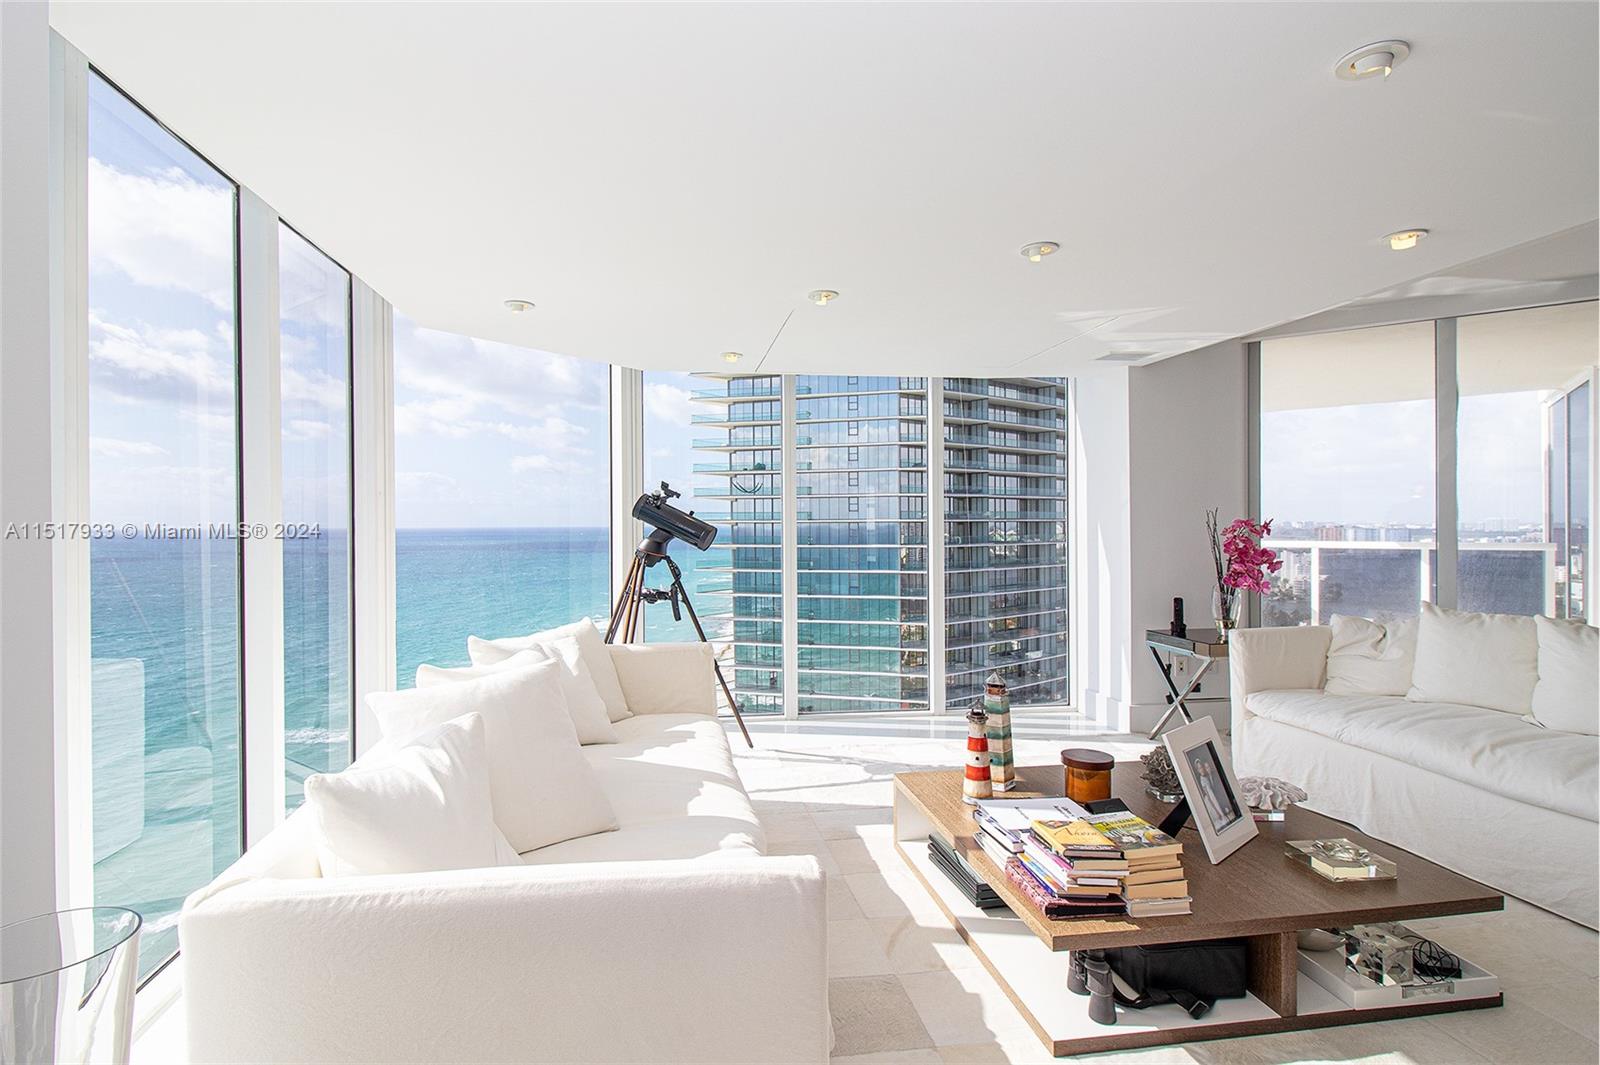 Look No Further! Dream Beachfront Condo on the 28th floor in Sunny Isles Beach:
This 2,660 sq ft unit offers mesmerizing dual views of the intercoastal and beach. With 3 luxurious bedrooms and 3.5 baths, it radiates comfort. Large windows flood the unit with light, enhancing its spacious feel. Enjoy direct beach access. Also available is a private cabana, sold separately, perfect for seaside relaxion. Located in the heart of Sunny Isles, this property is a stone's throw from top dining and shopping. Experience beach front living at its finest. Your search ends here!
Equal Housing Opportunity.